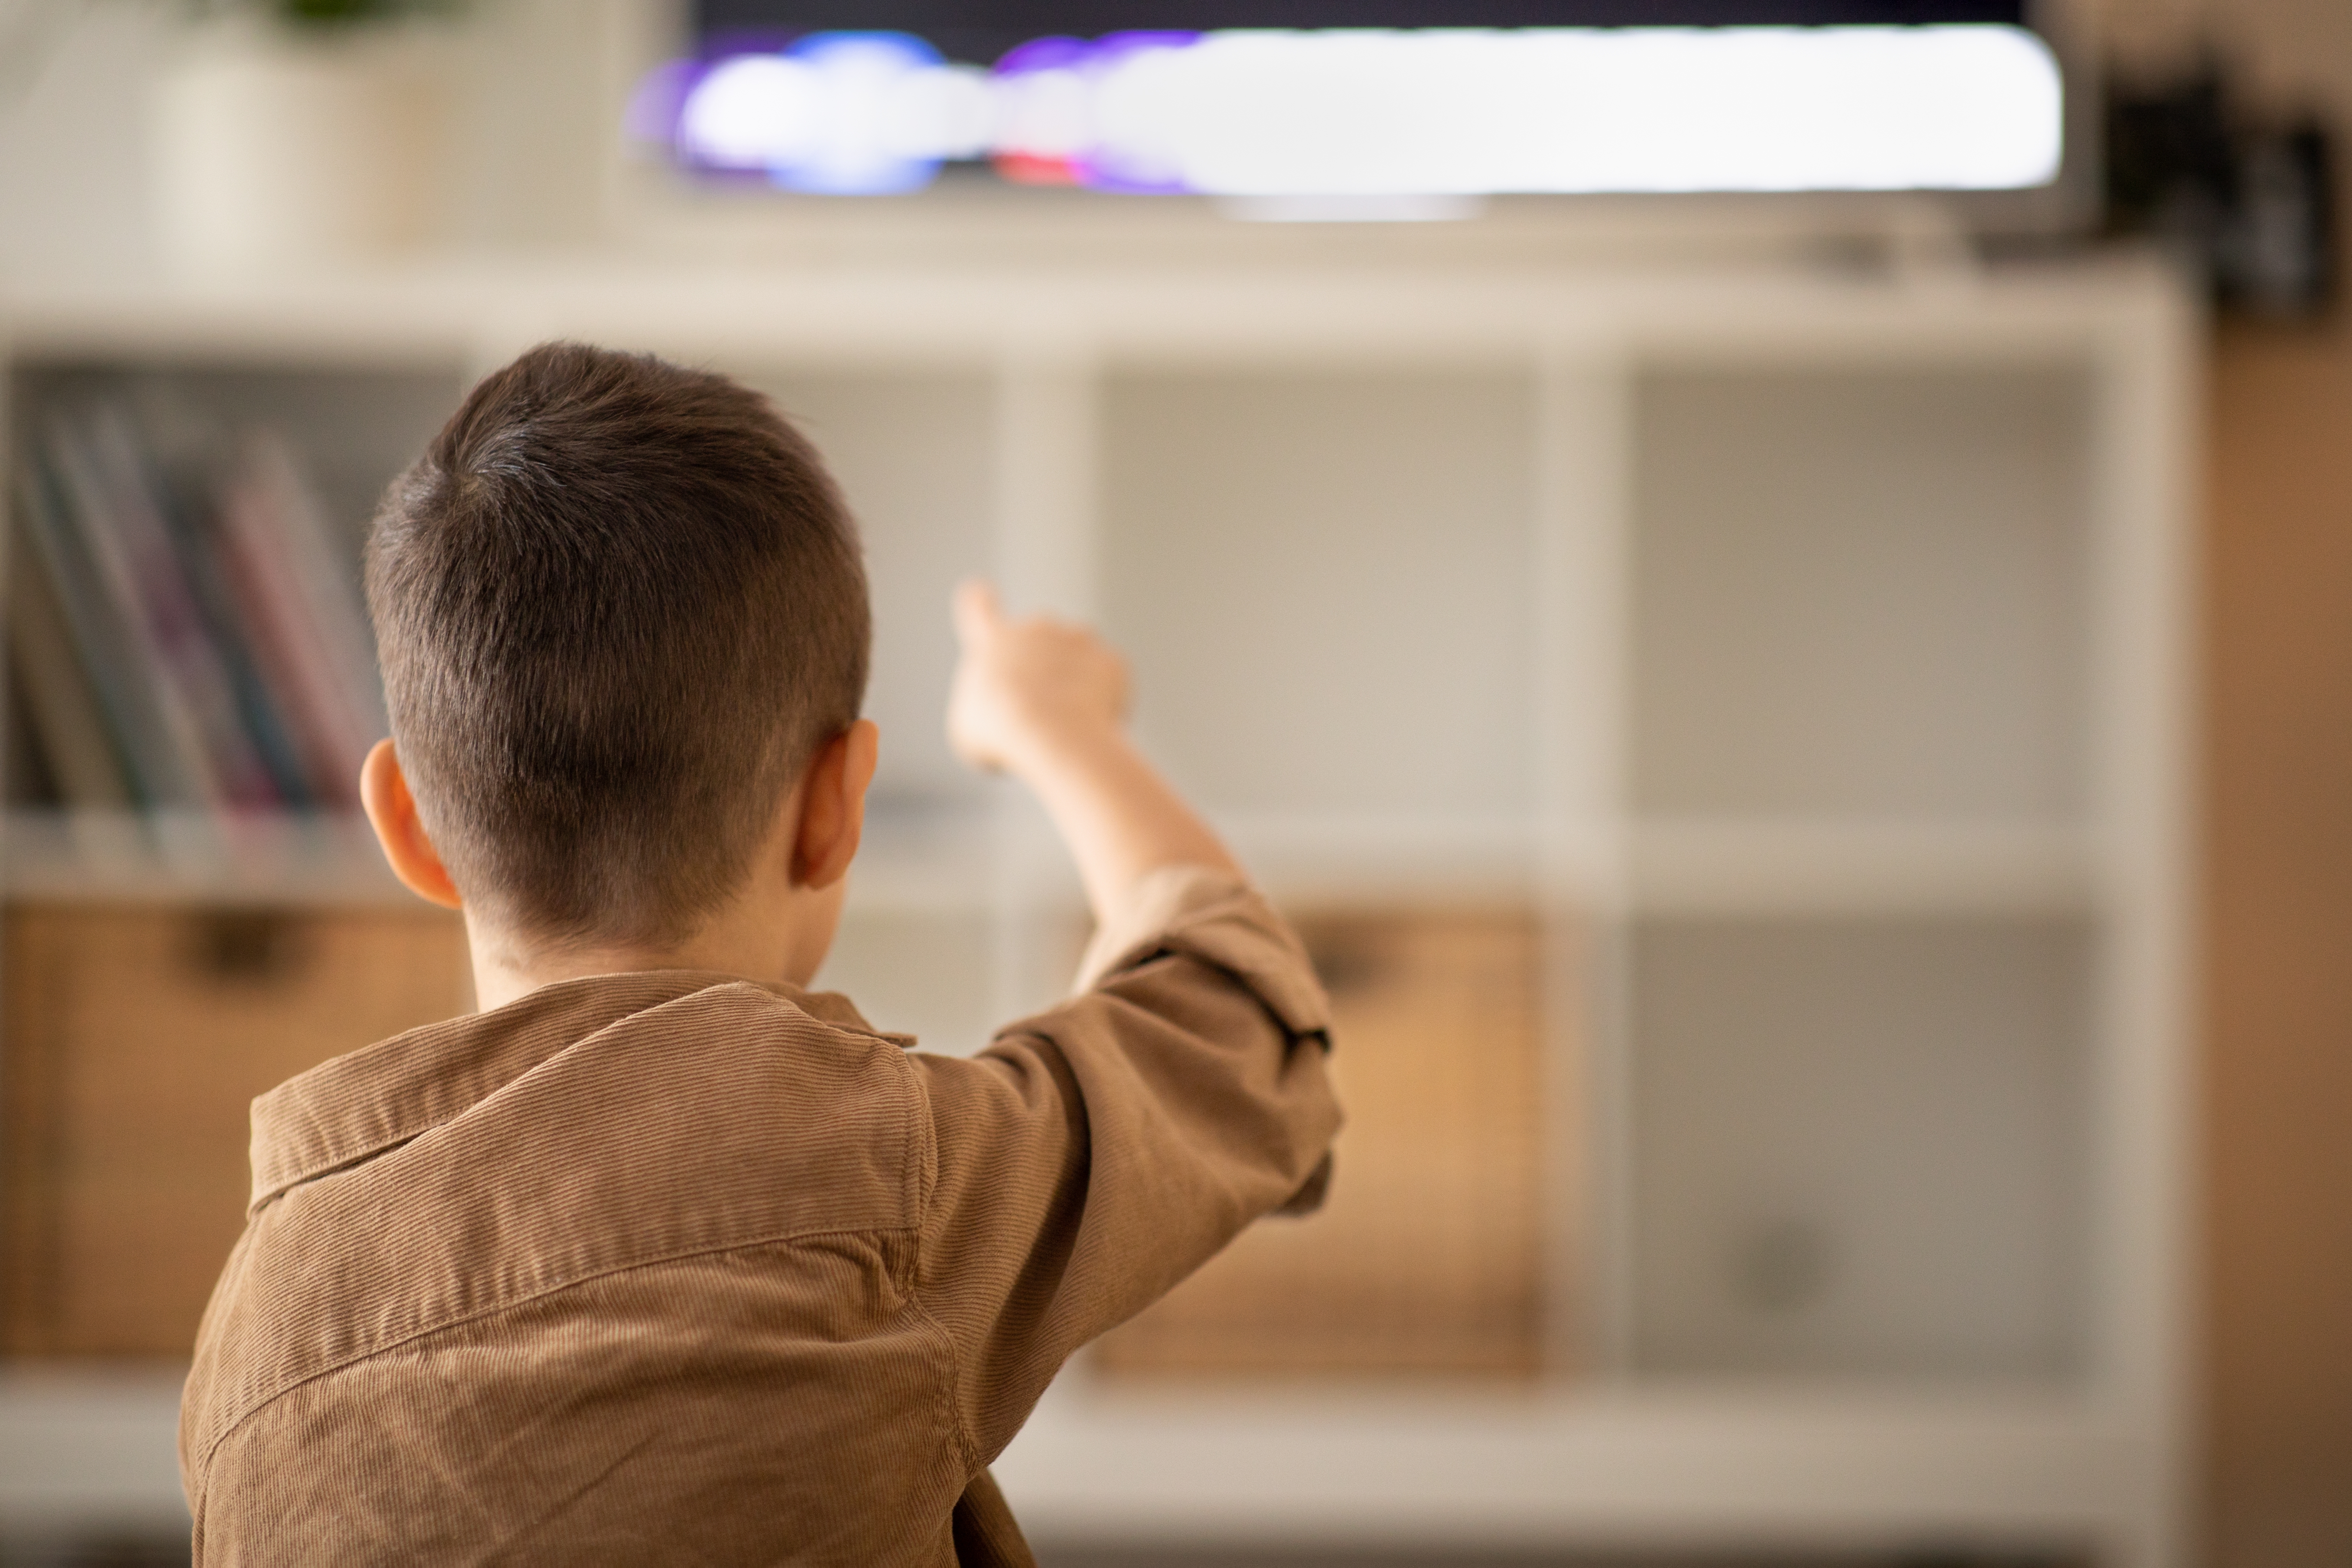 Small kid watch video, pointing finger at tv set. | Source: Shutterstock